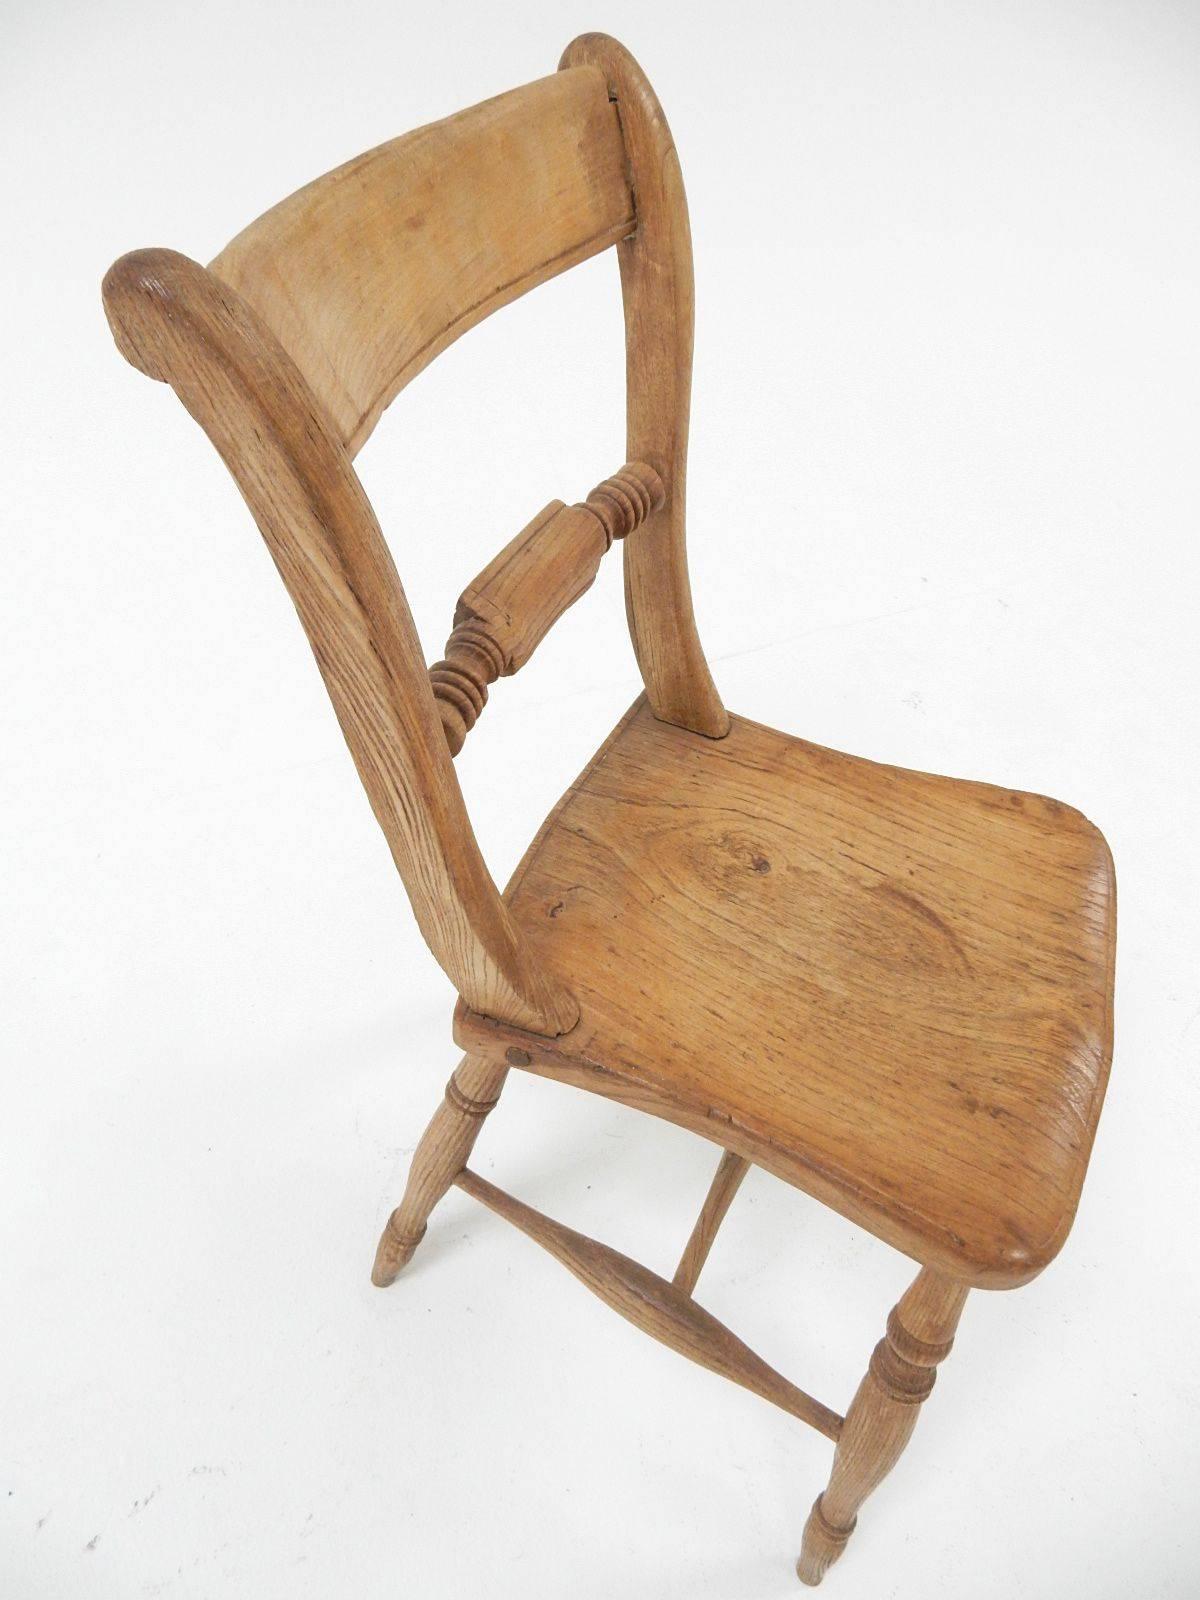 Unique, crudely handcrafted farm chairs, one baring the 